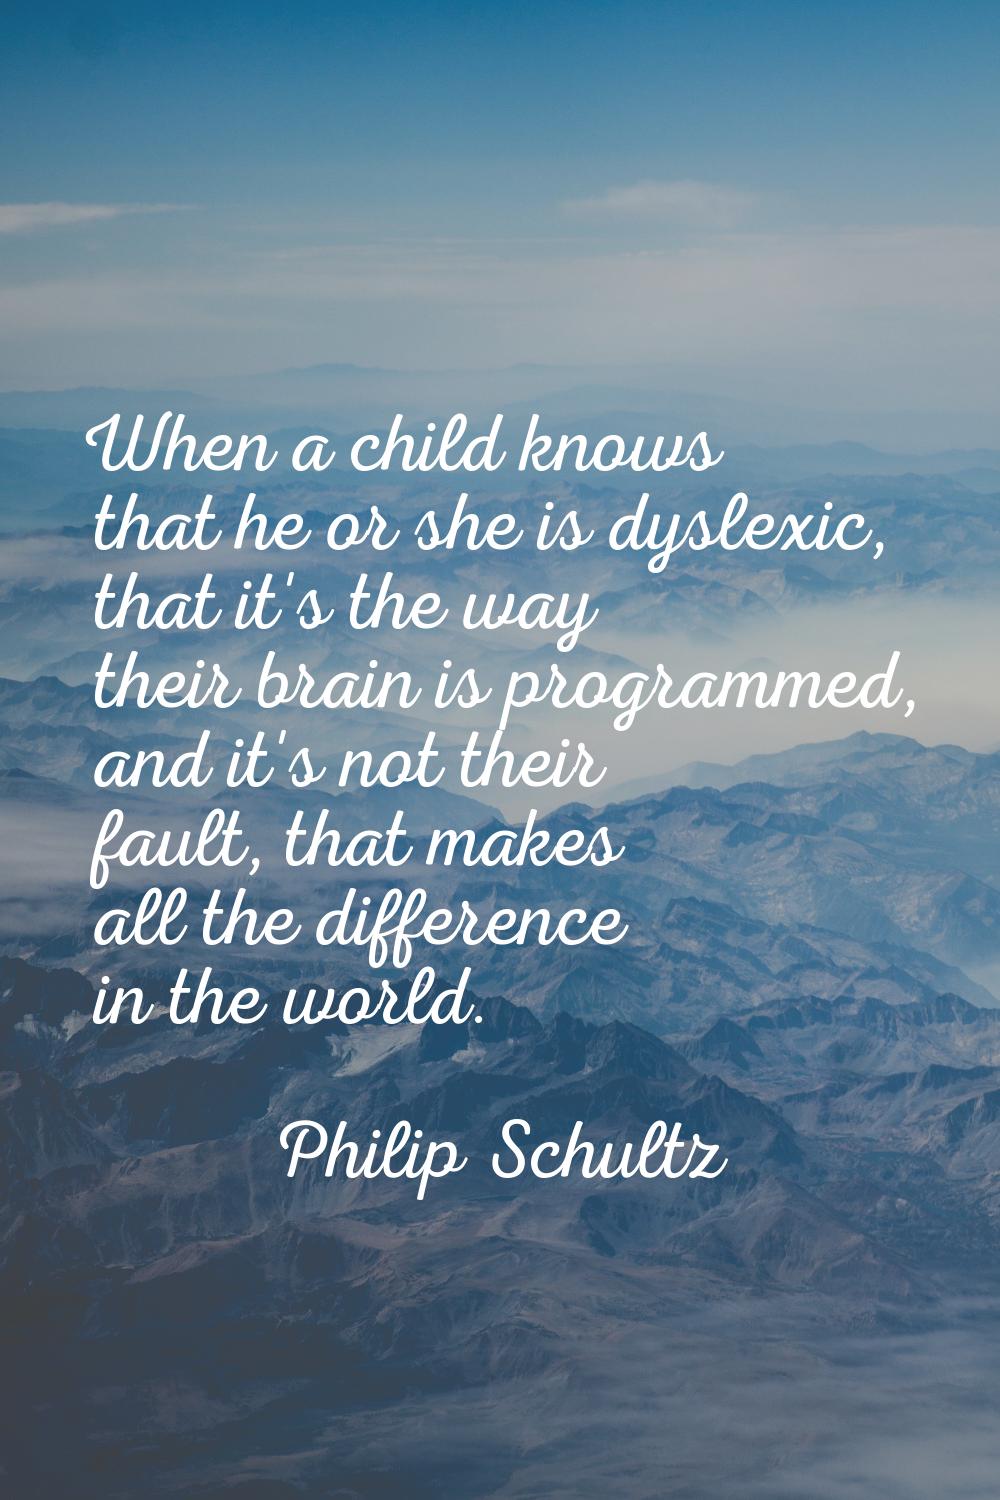 When a child knows that he or she is dyslexic, that it's the way their brain is programmed, and it'